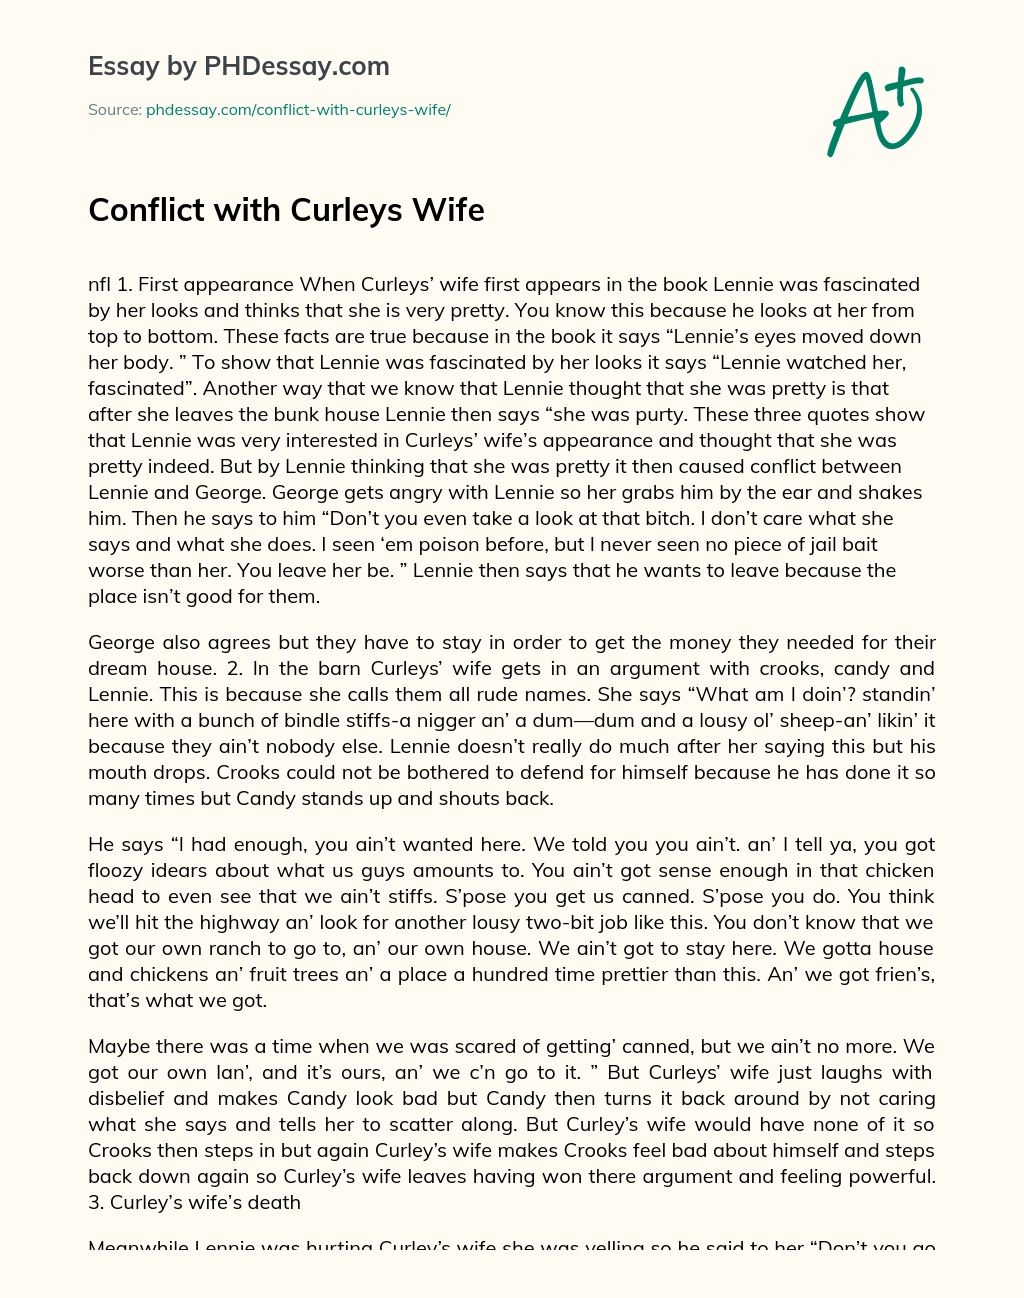 Conflict with Curleys Wife essay